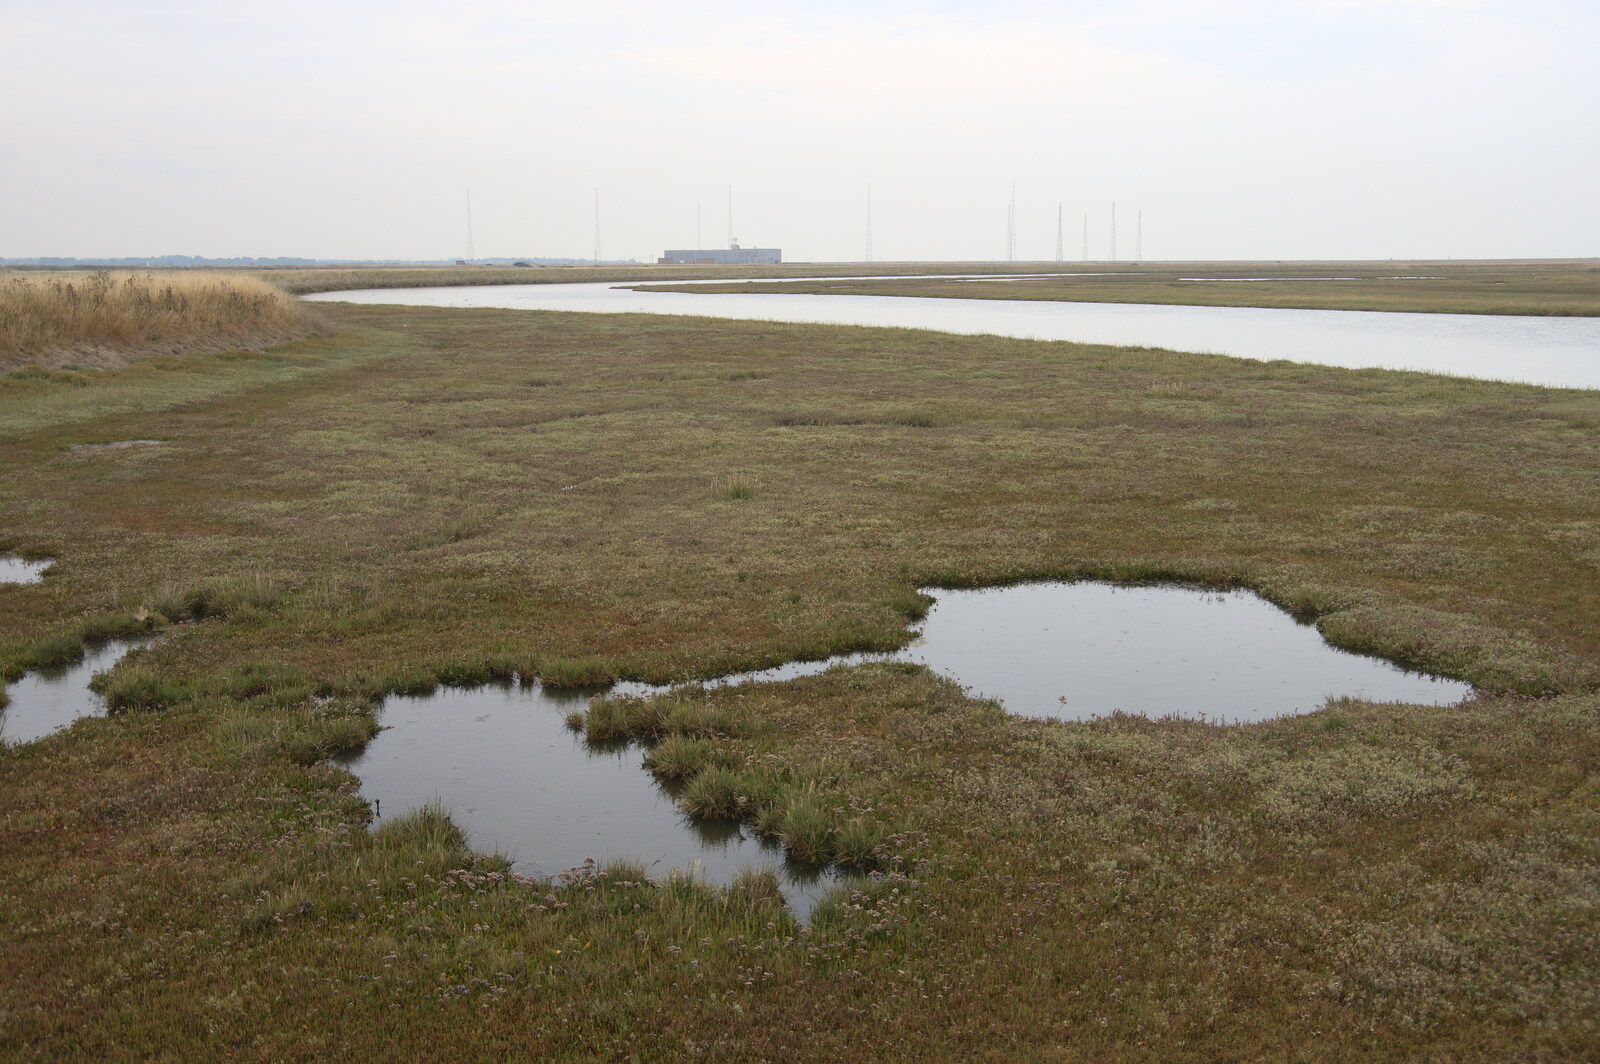 Looking out towards the Cobra Mist radar test site from A Trip to Orford Ness, Orford, Suffolk - 16th August 2022